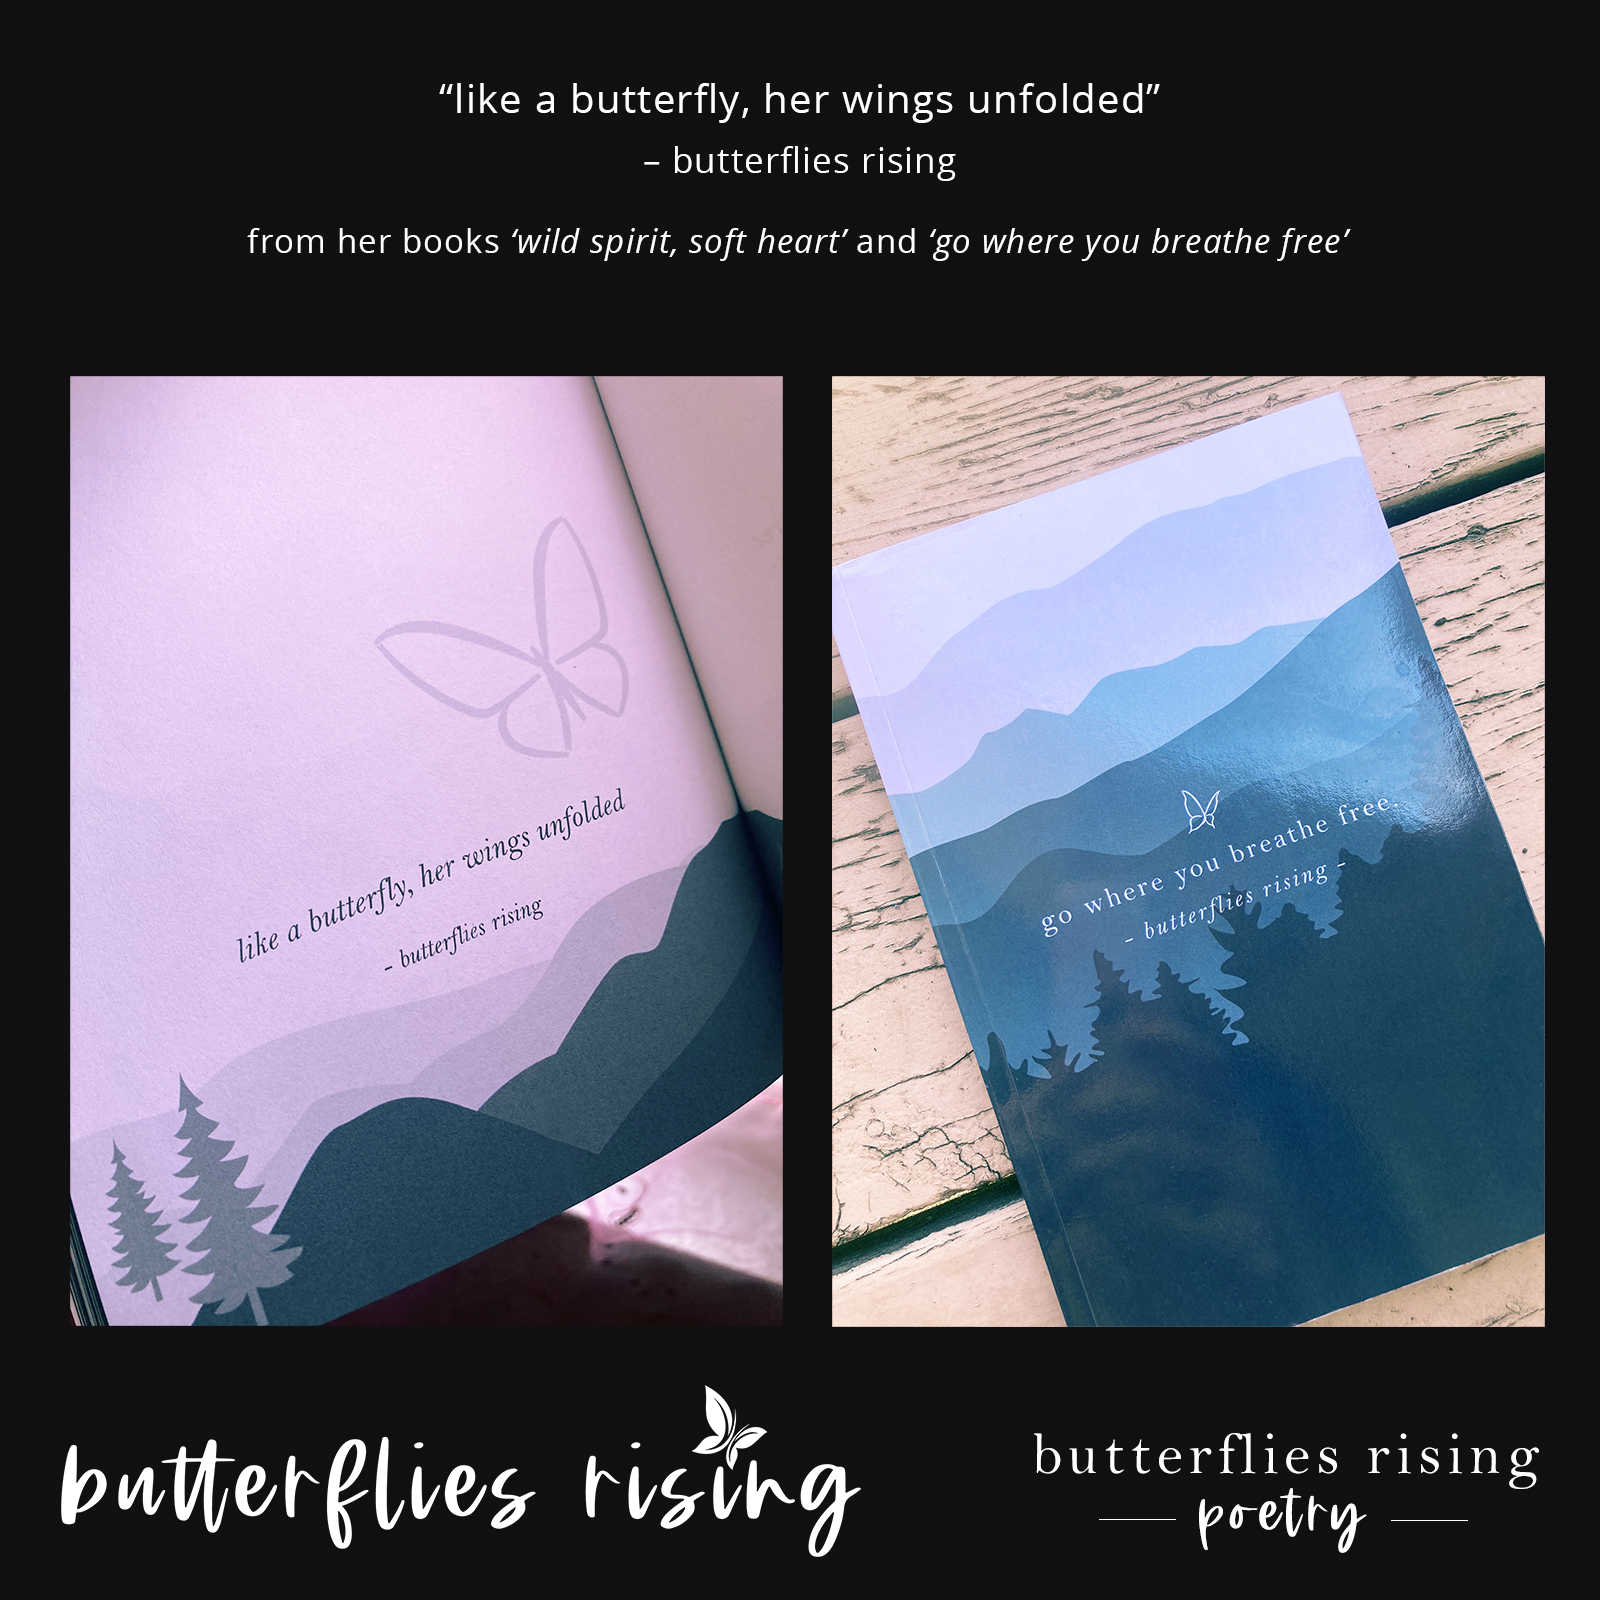 like a butterfly, her wings unfolded - butterflies rising - go where you breathe free